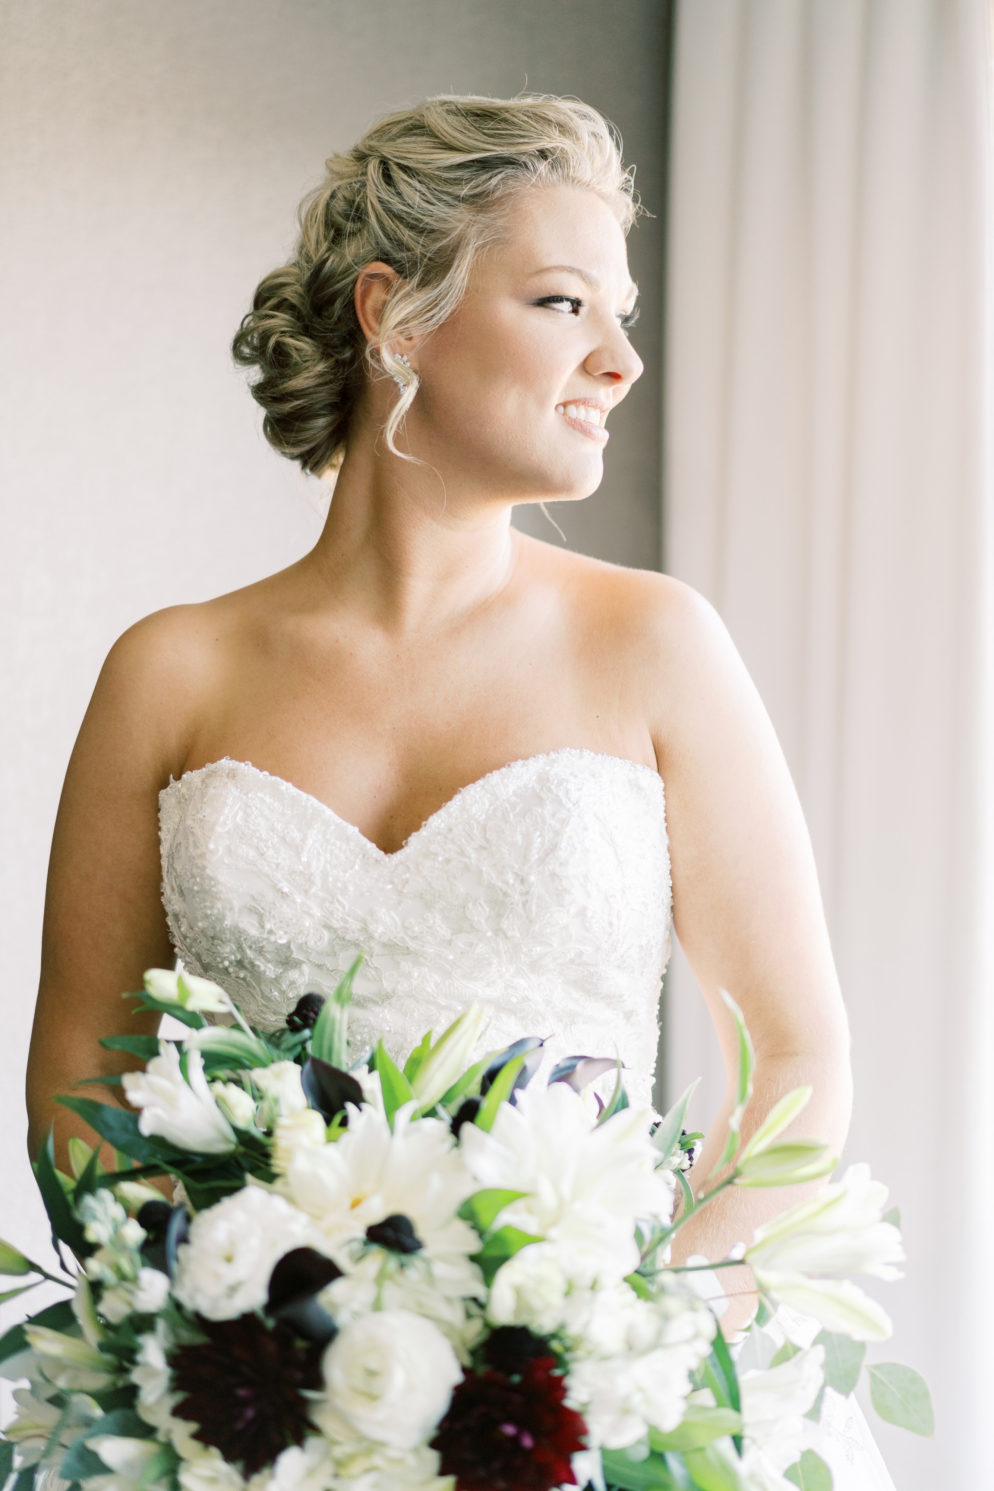 This November Wedding Featured DC Themes, a Moody Color Palette, and ...